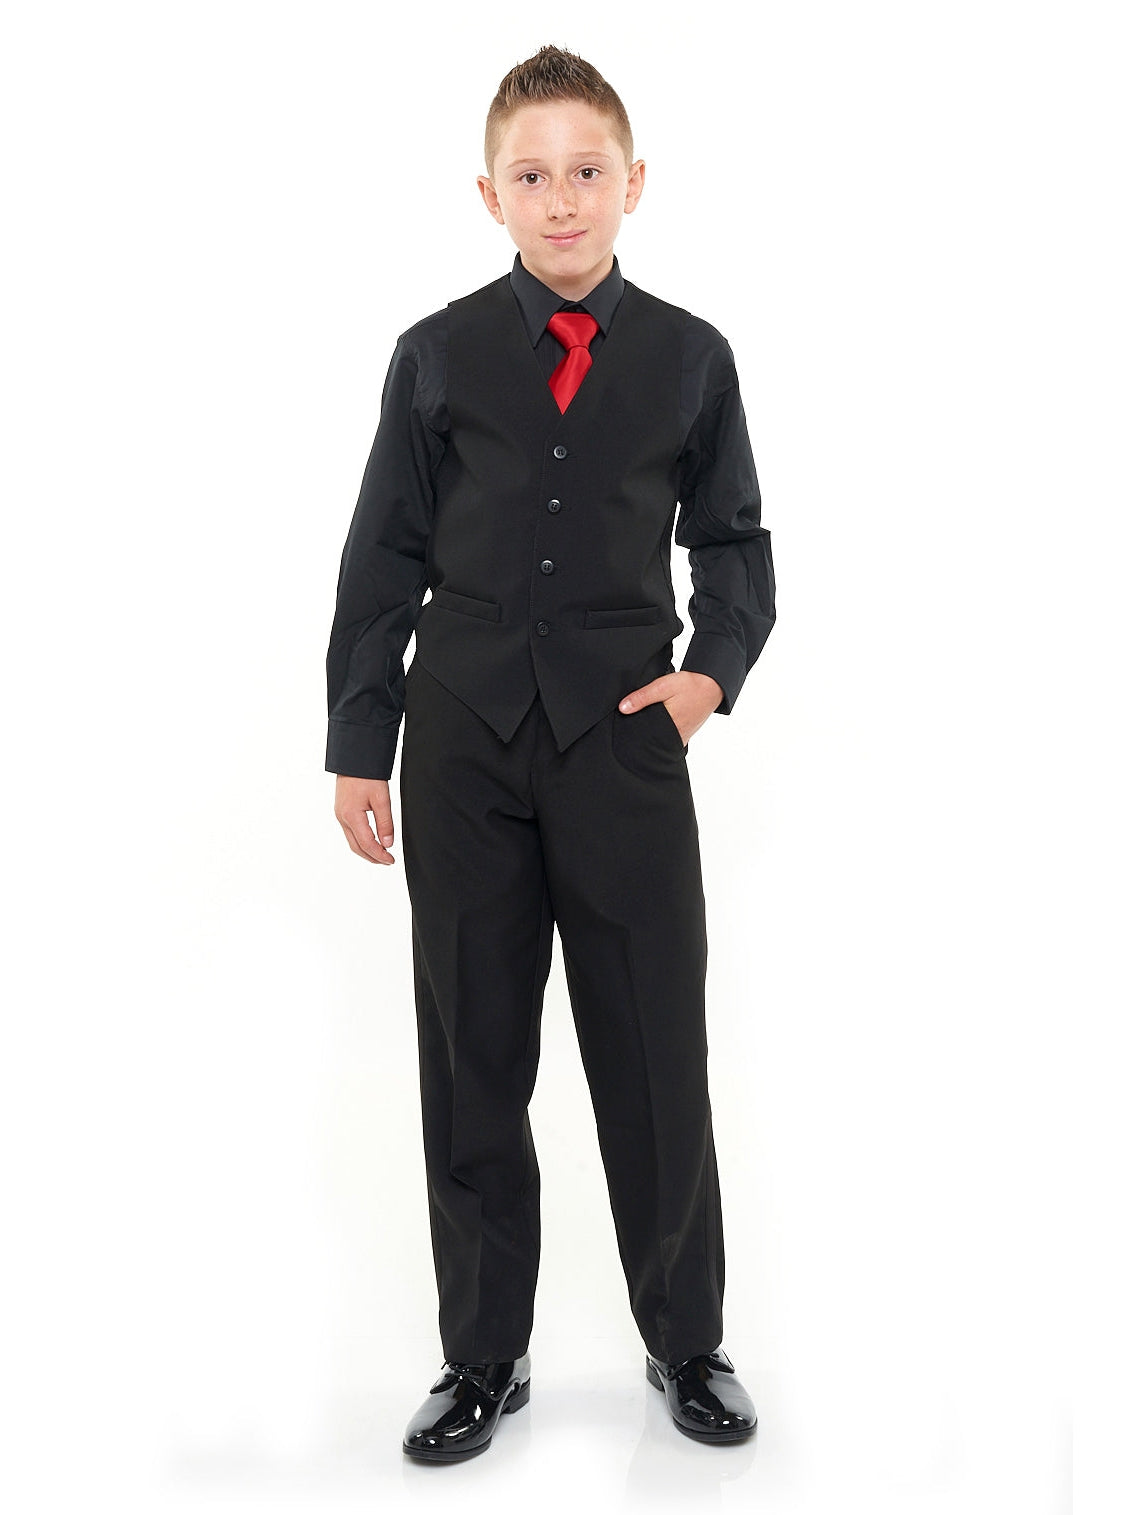 RILEY (Style #6710B) - Black Shirt, Vest, Tie Package with Pant - Boys